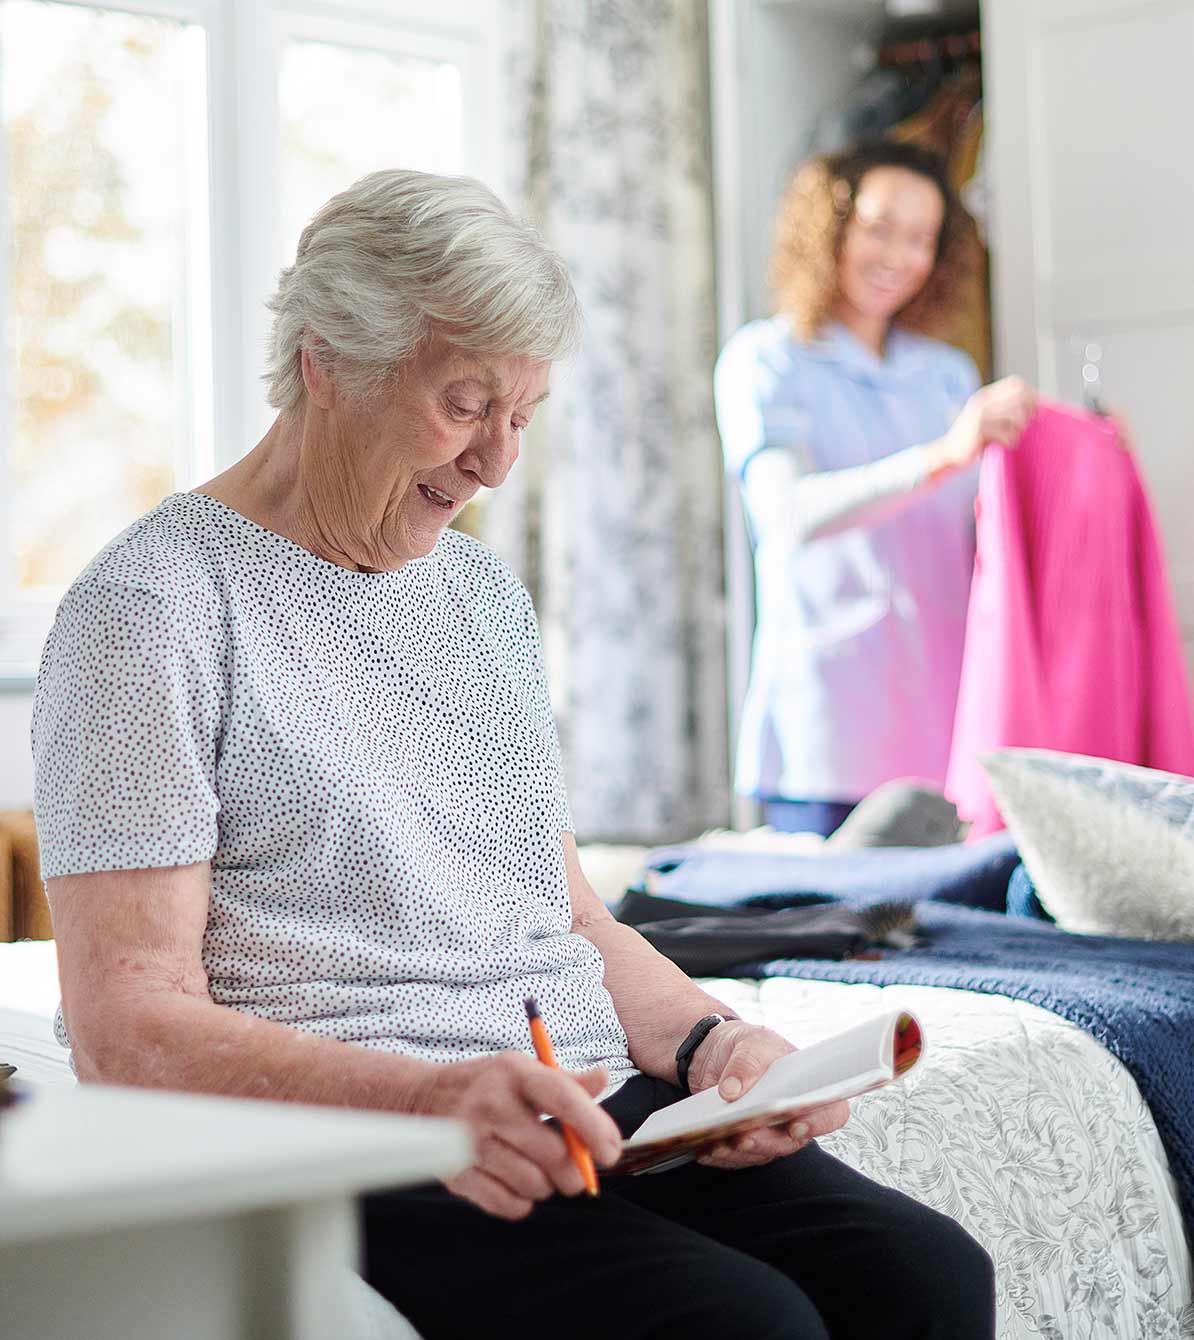 A caregiver folds laundry, while her client reads a magazine